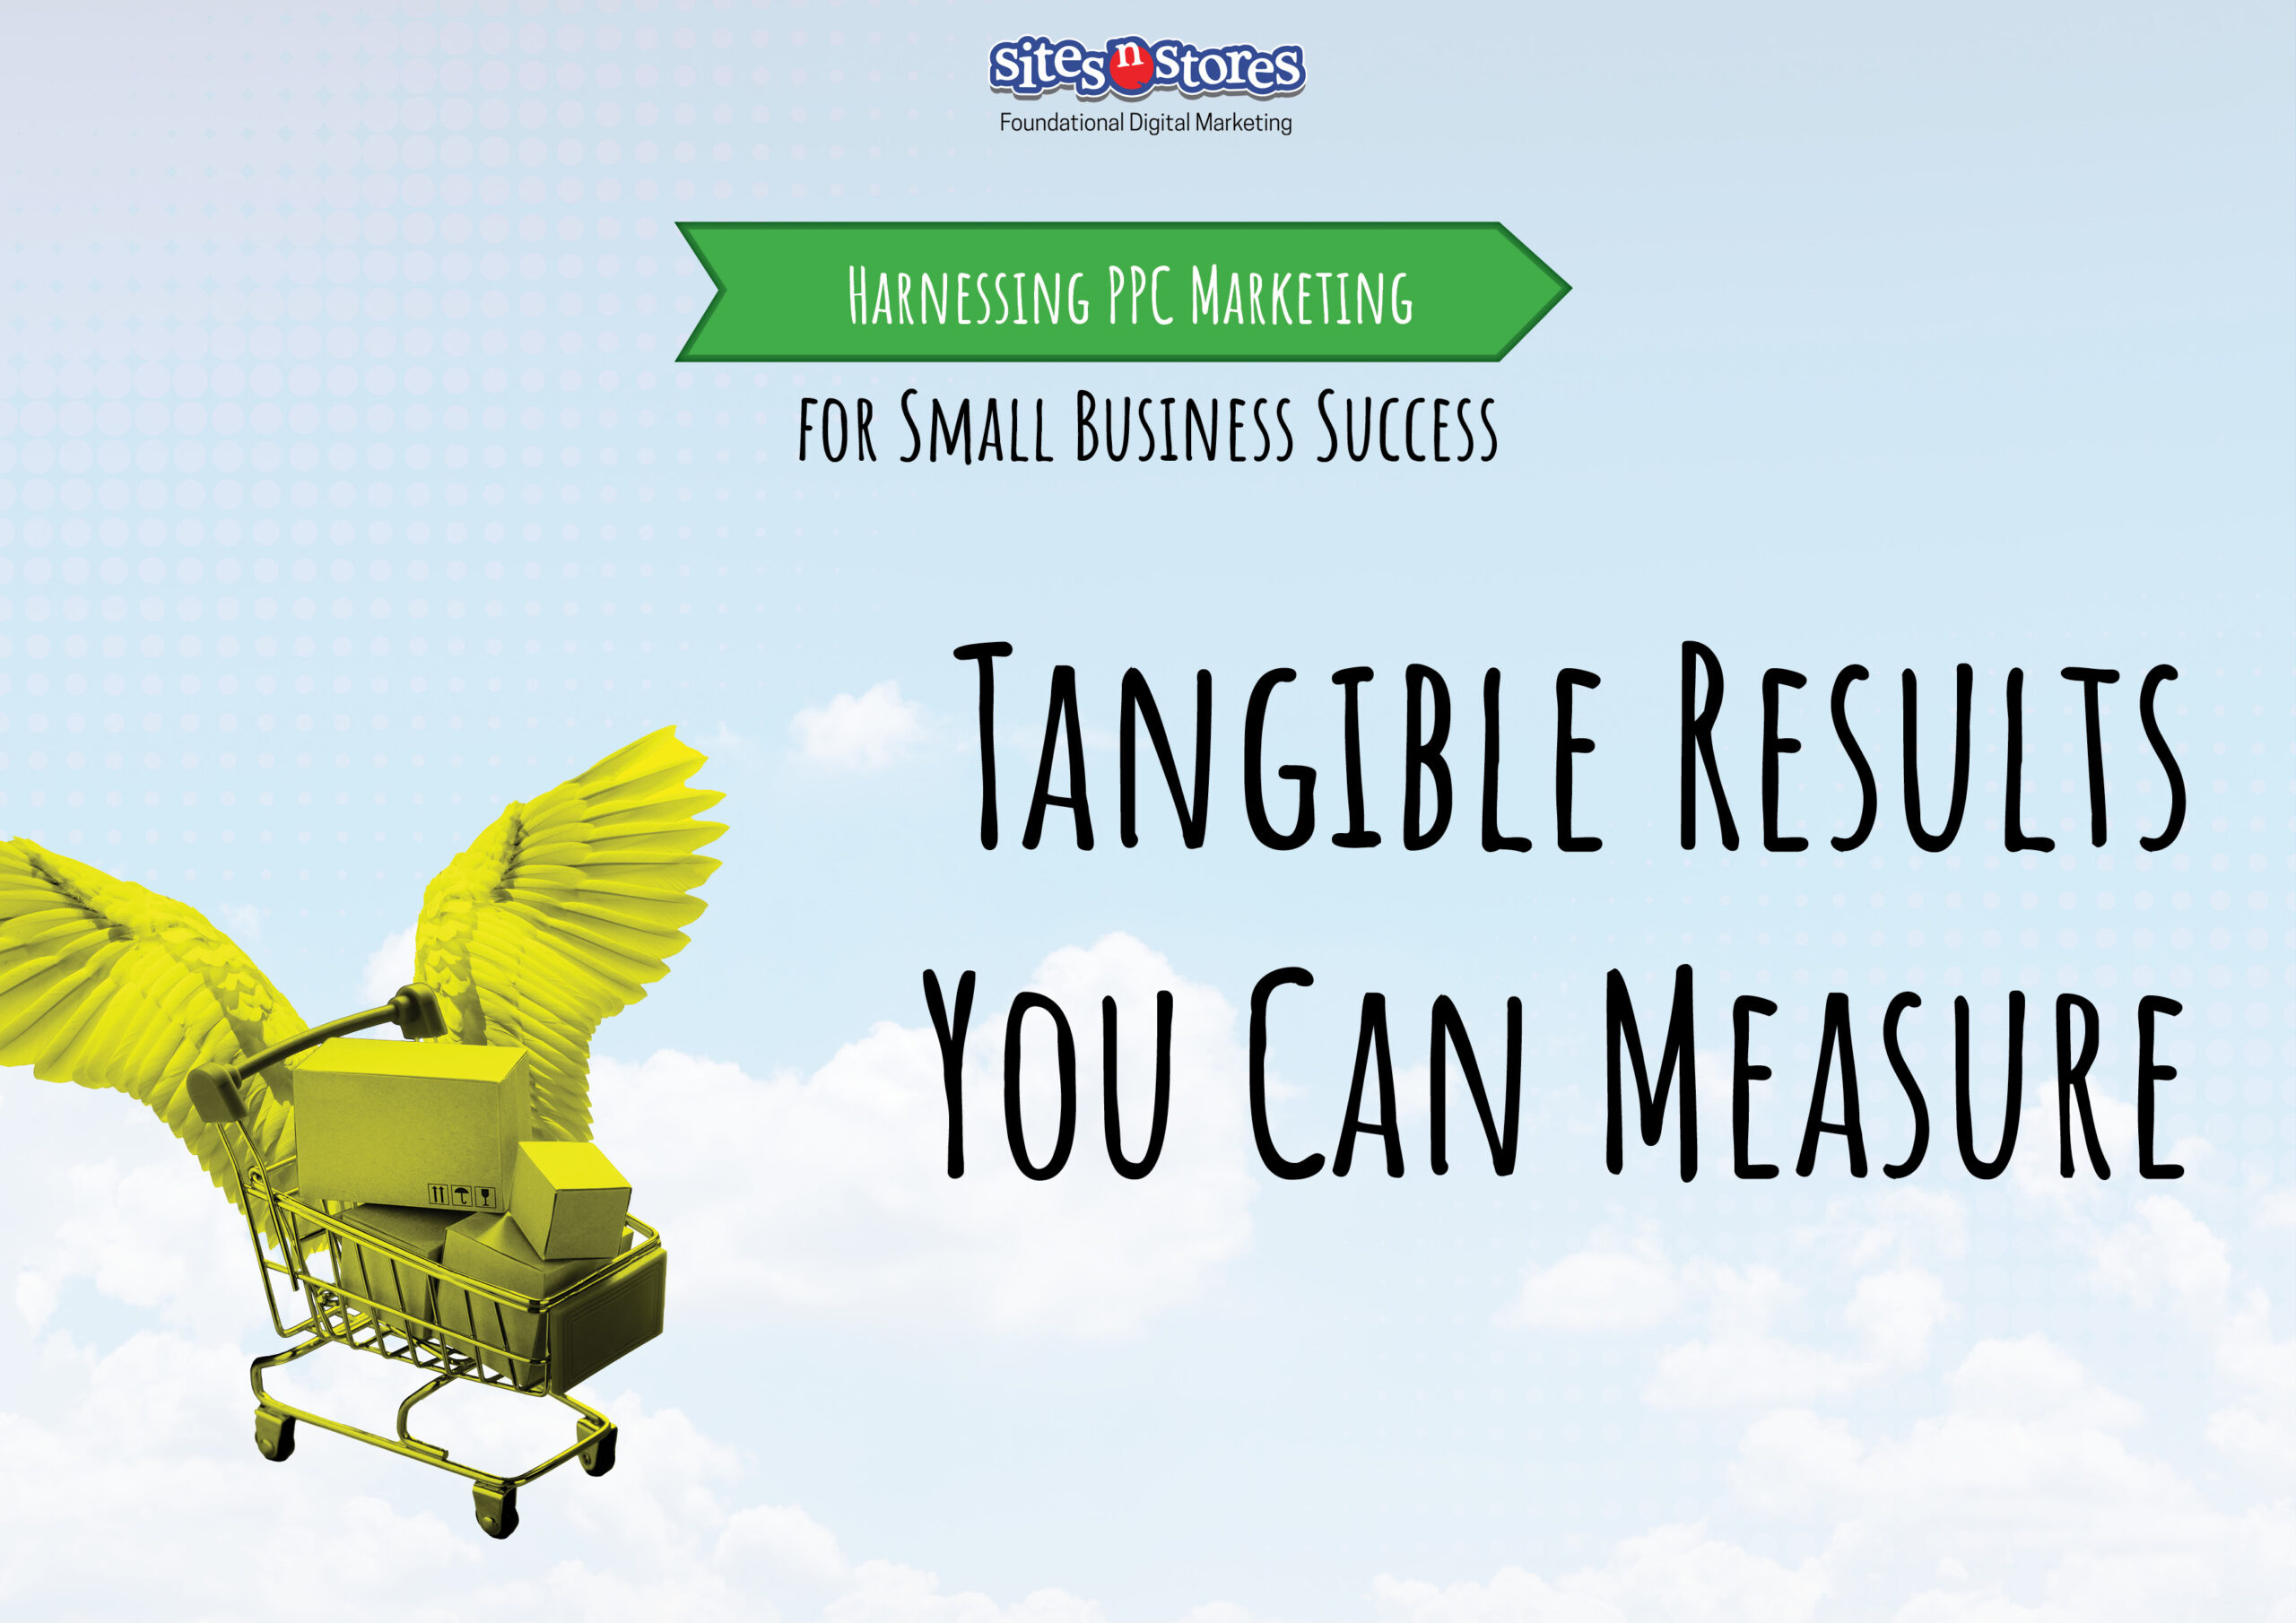 Tangible Results You Can Measure